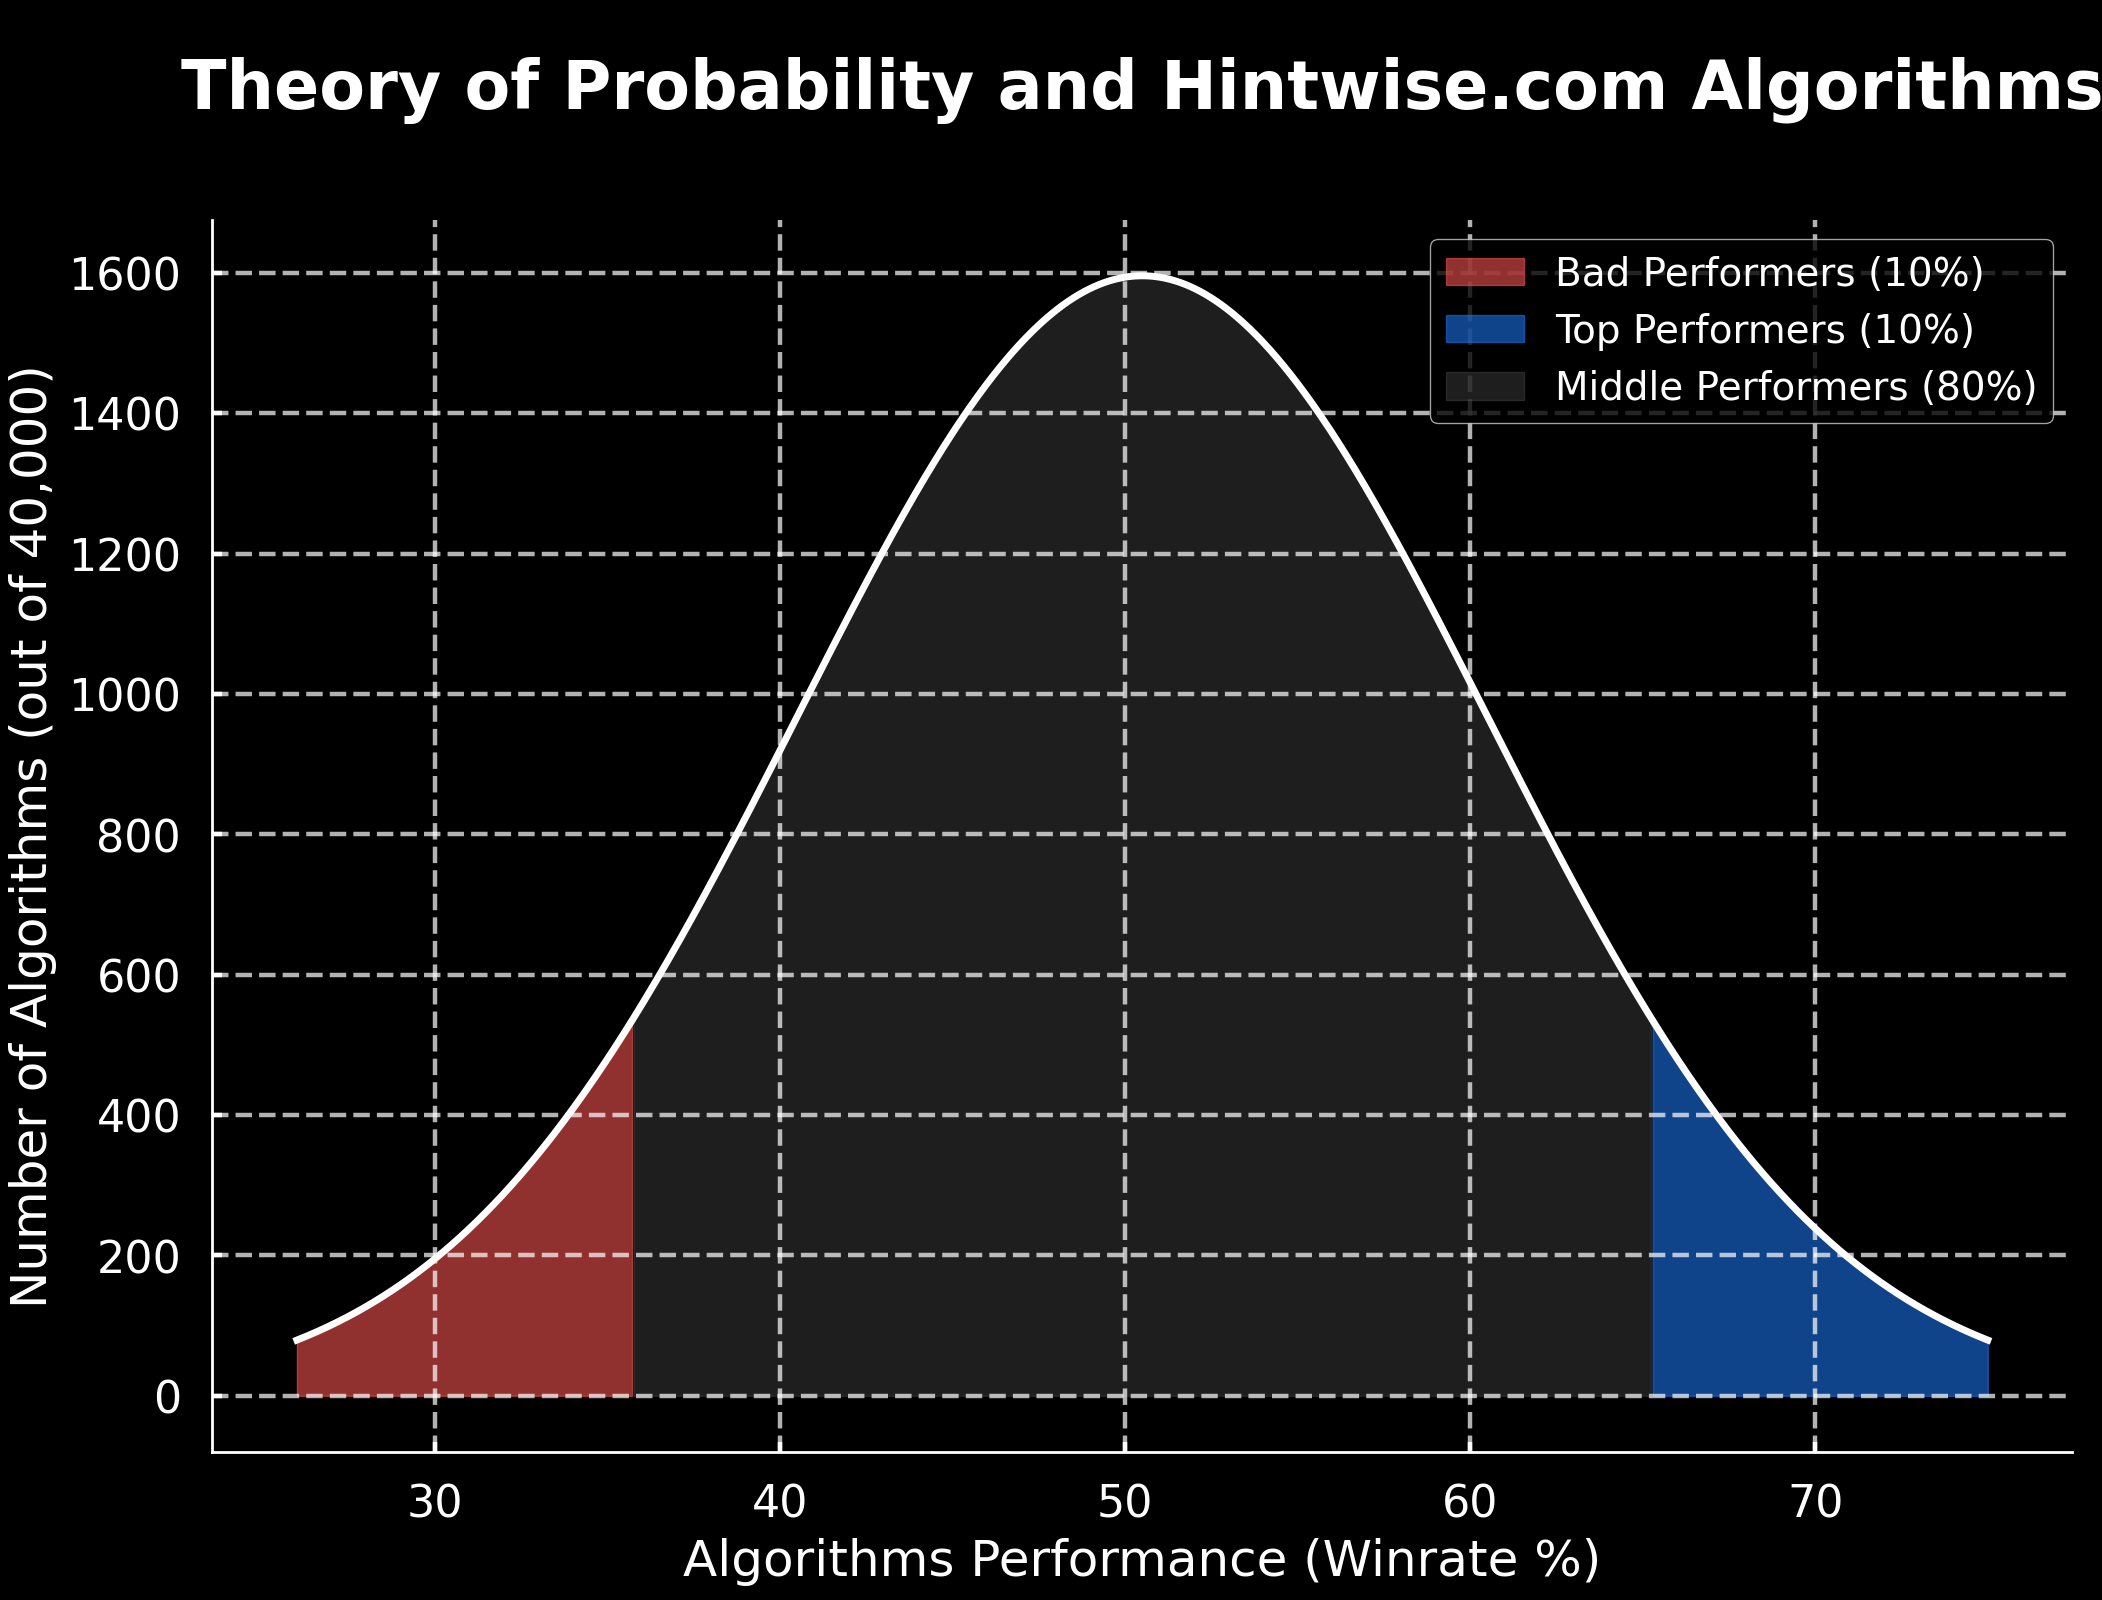 Theory of Probability and Hintwise.com Winning Algorithms